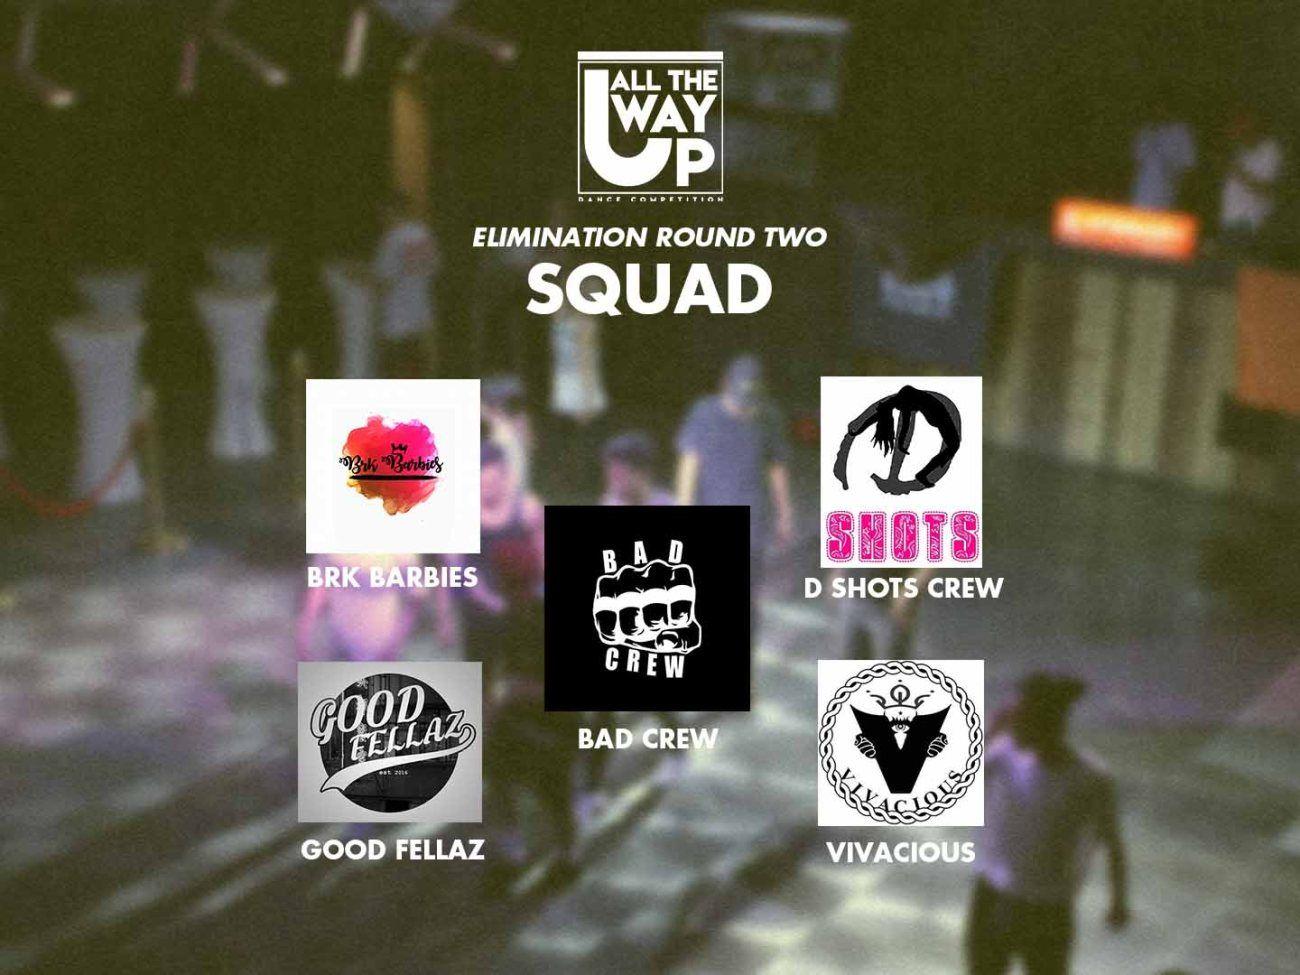 Round Squad Logo - Here's More For All The Way Up Dance Competition Second Elimination ...